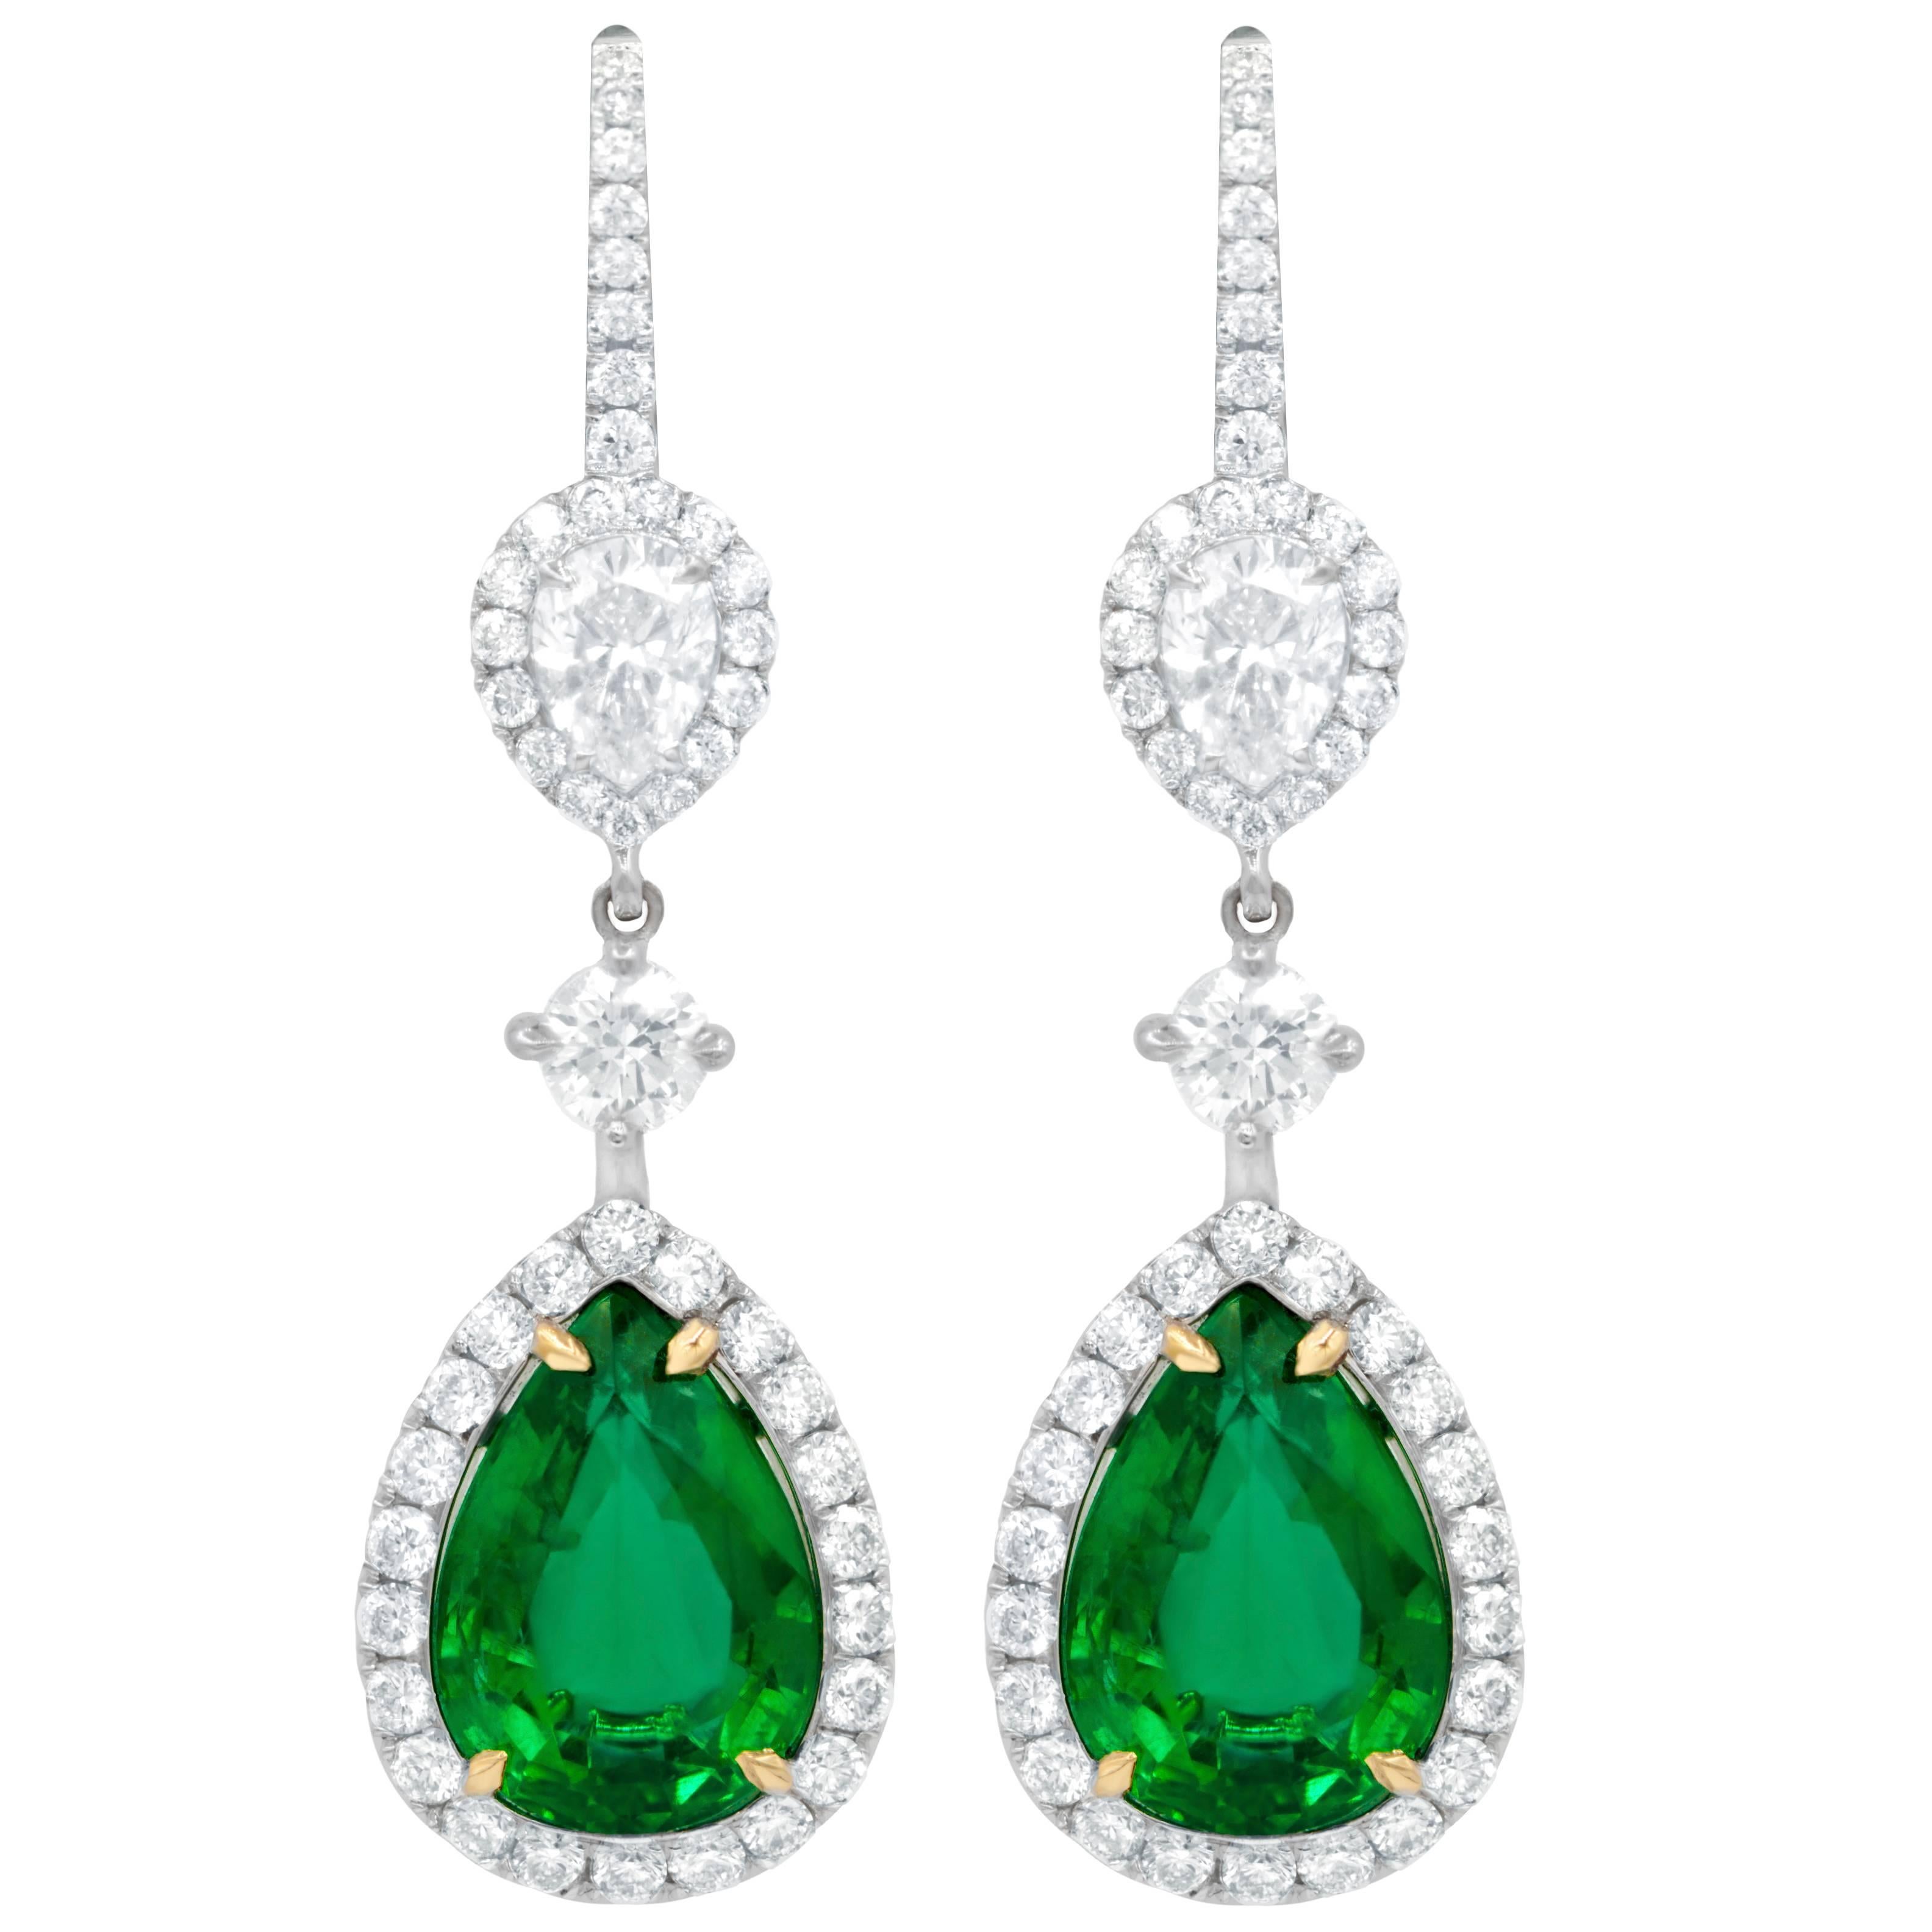 Magnificent Emerald and Diamond Earrings